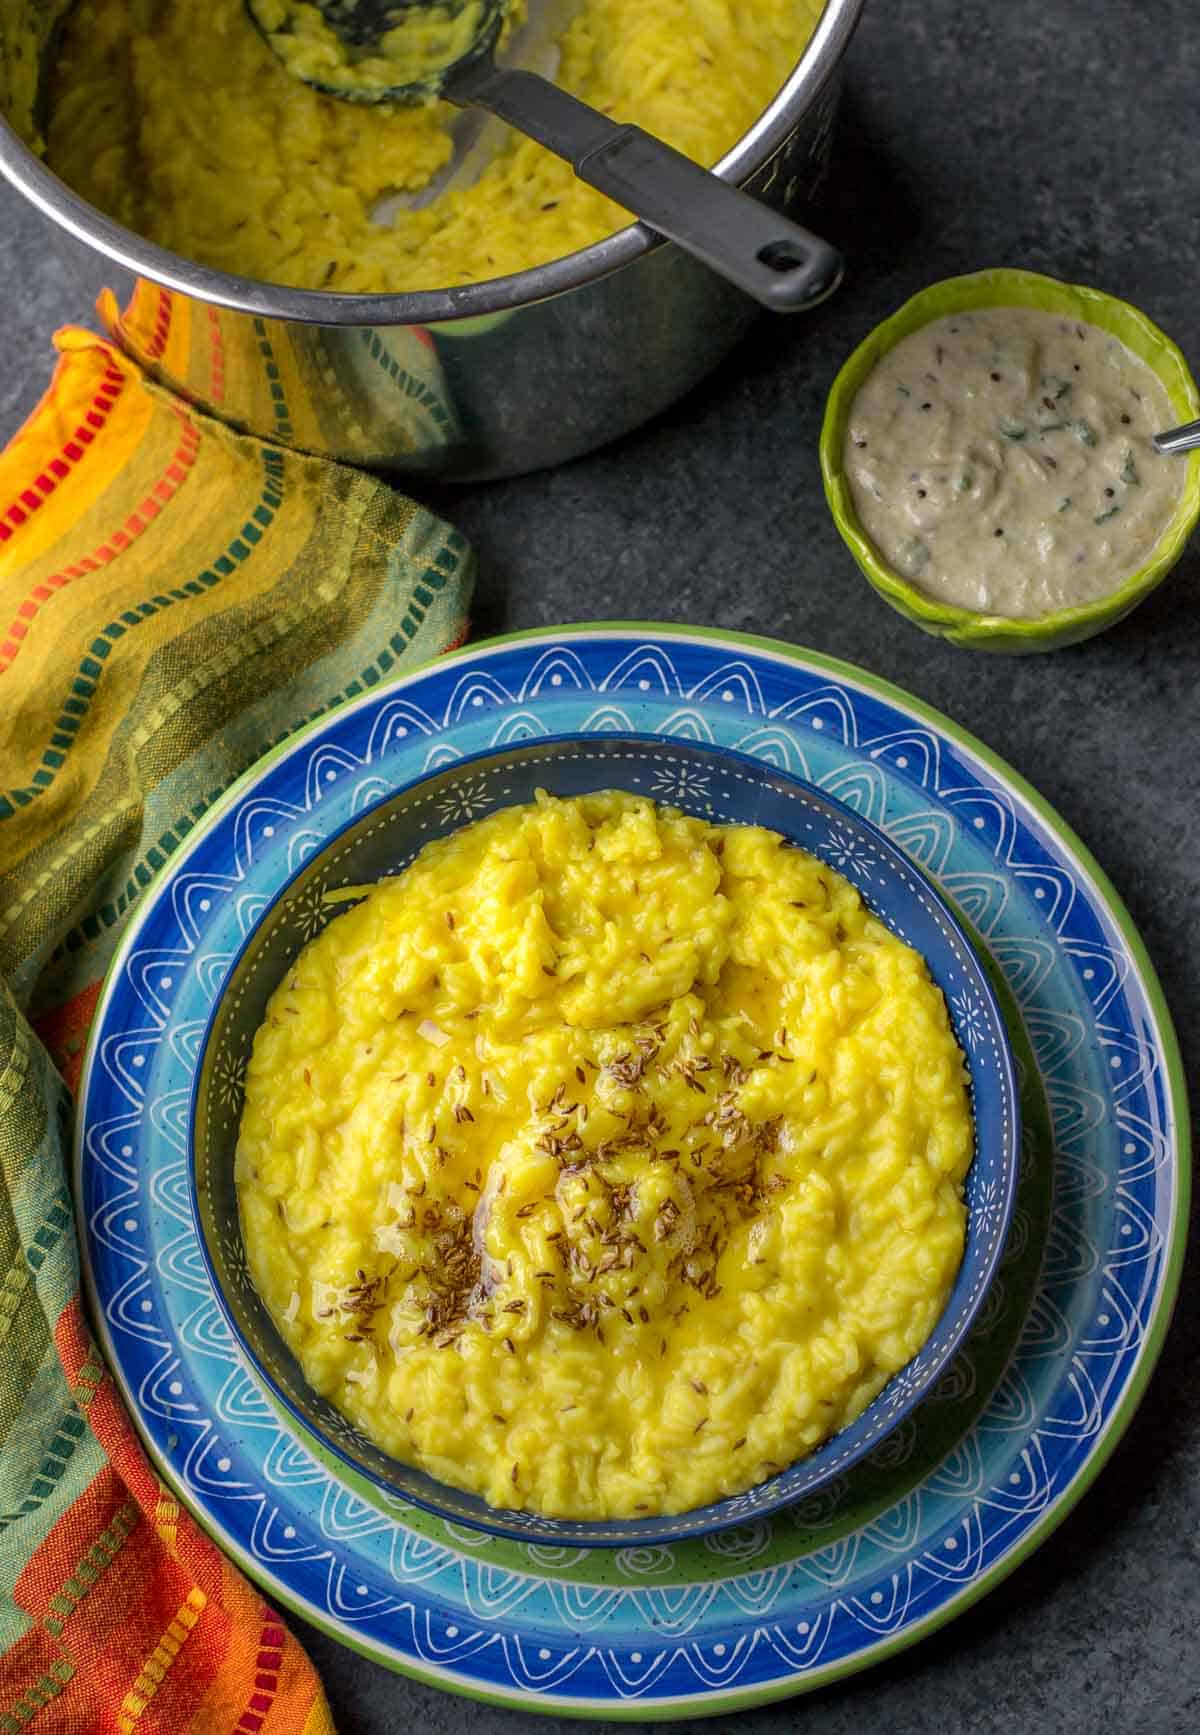 Moong dal khichdi tempered with ghee and jeera